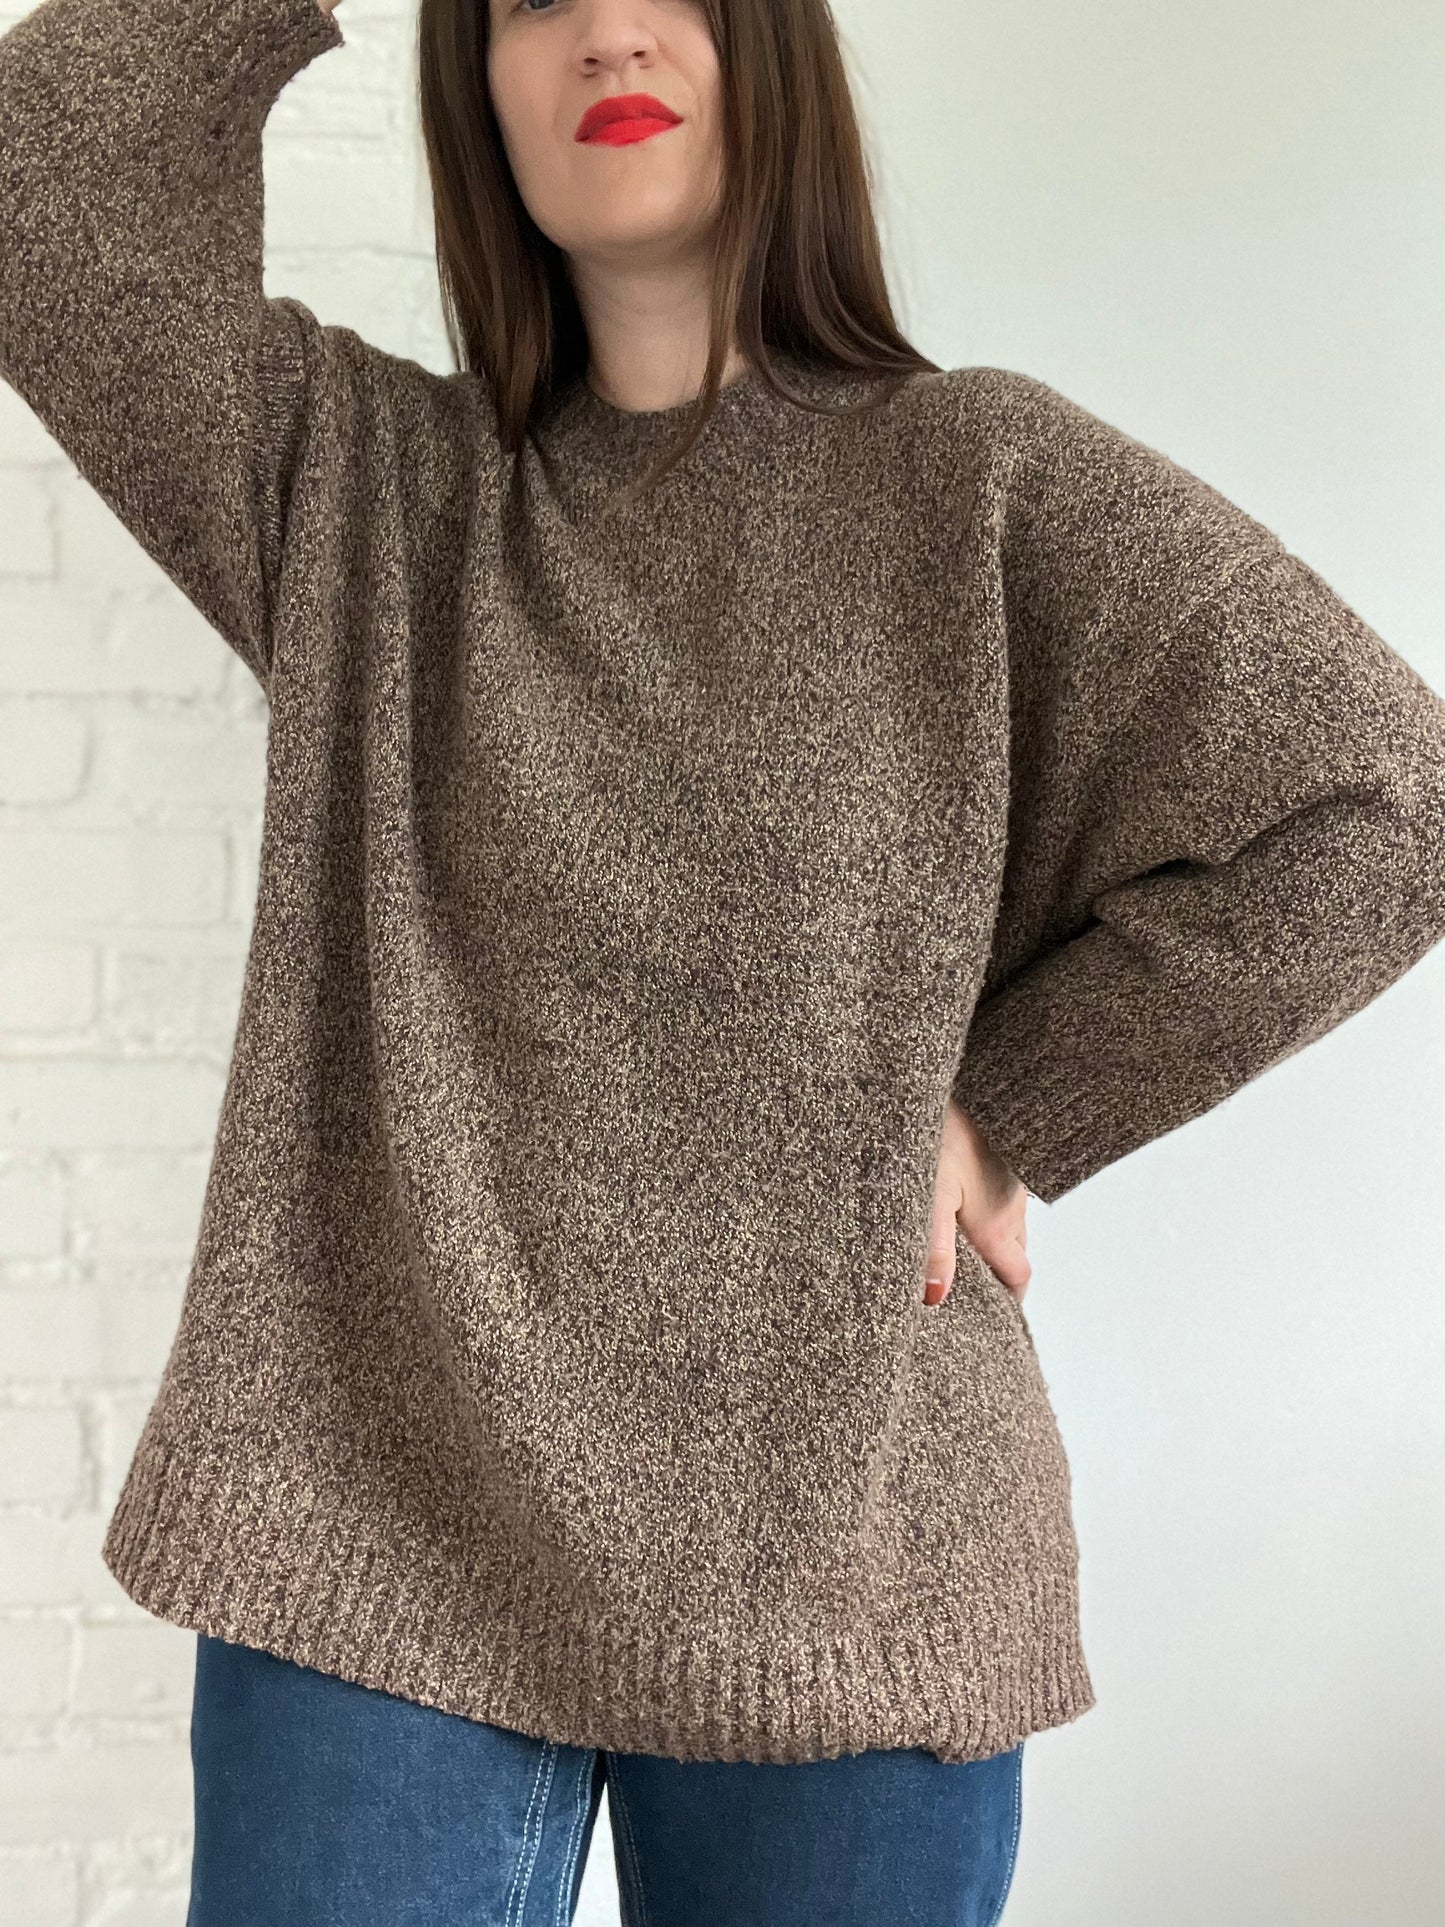 Oversized Chocolate Brown Sweater - S (Very Oversized)